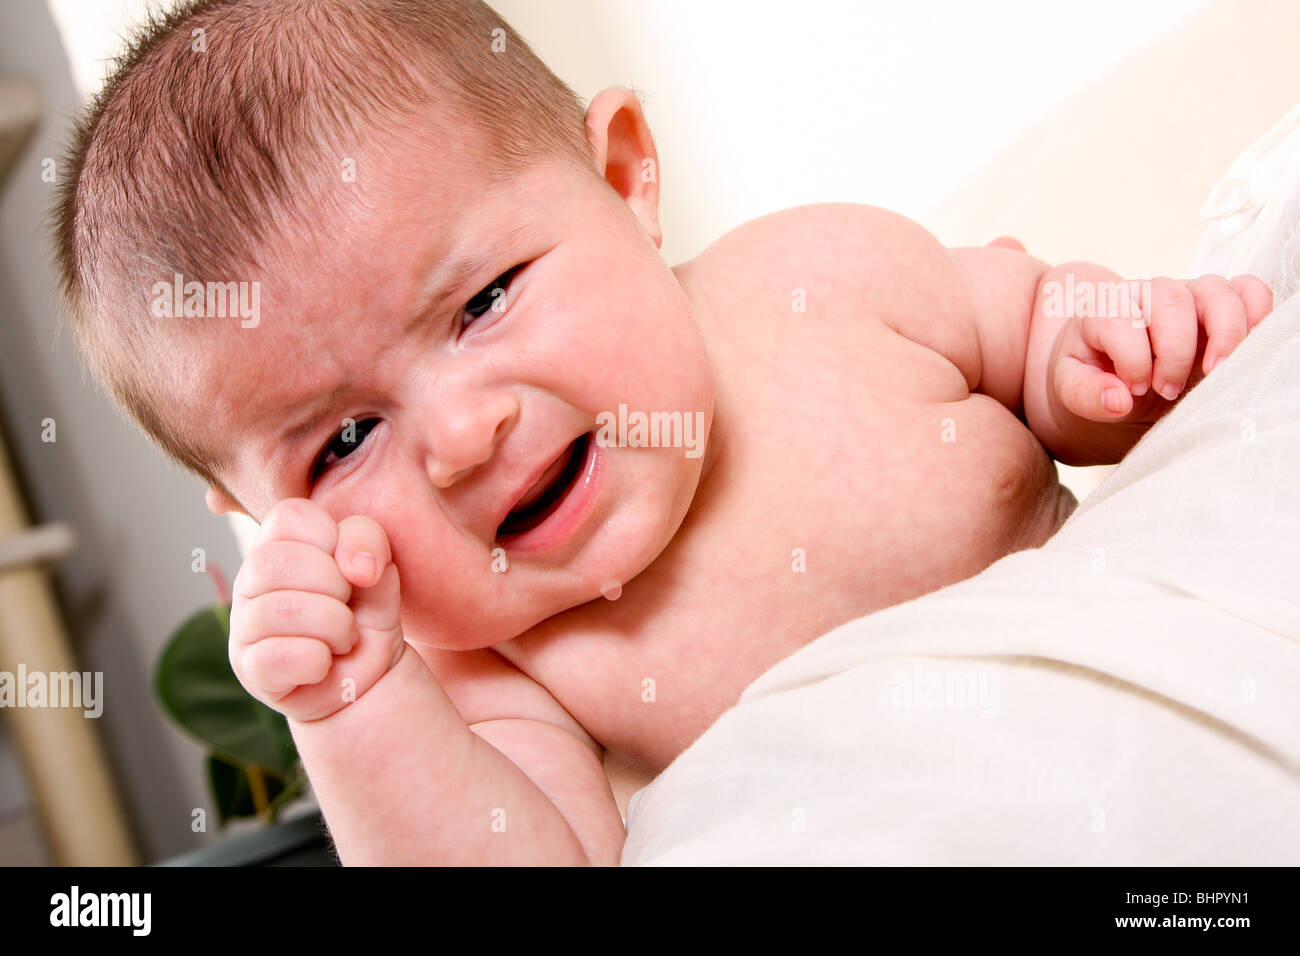 Youngest Cumshot Porn - Tear Stock Photos & Tear Stock Images - Alamy